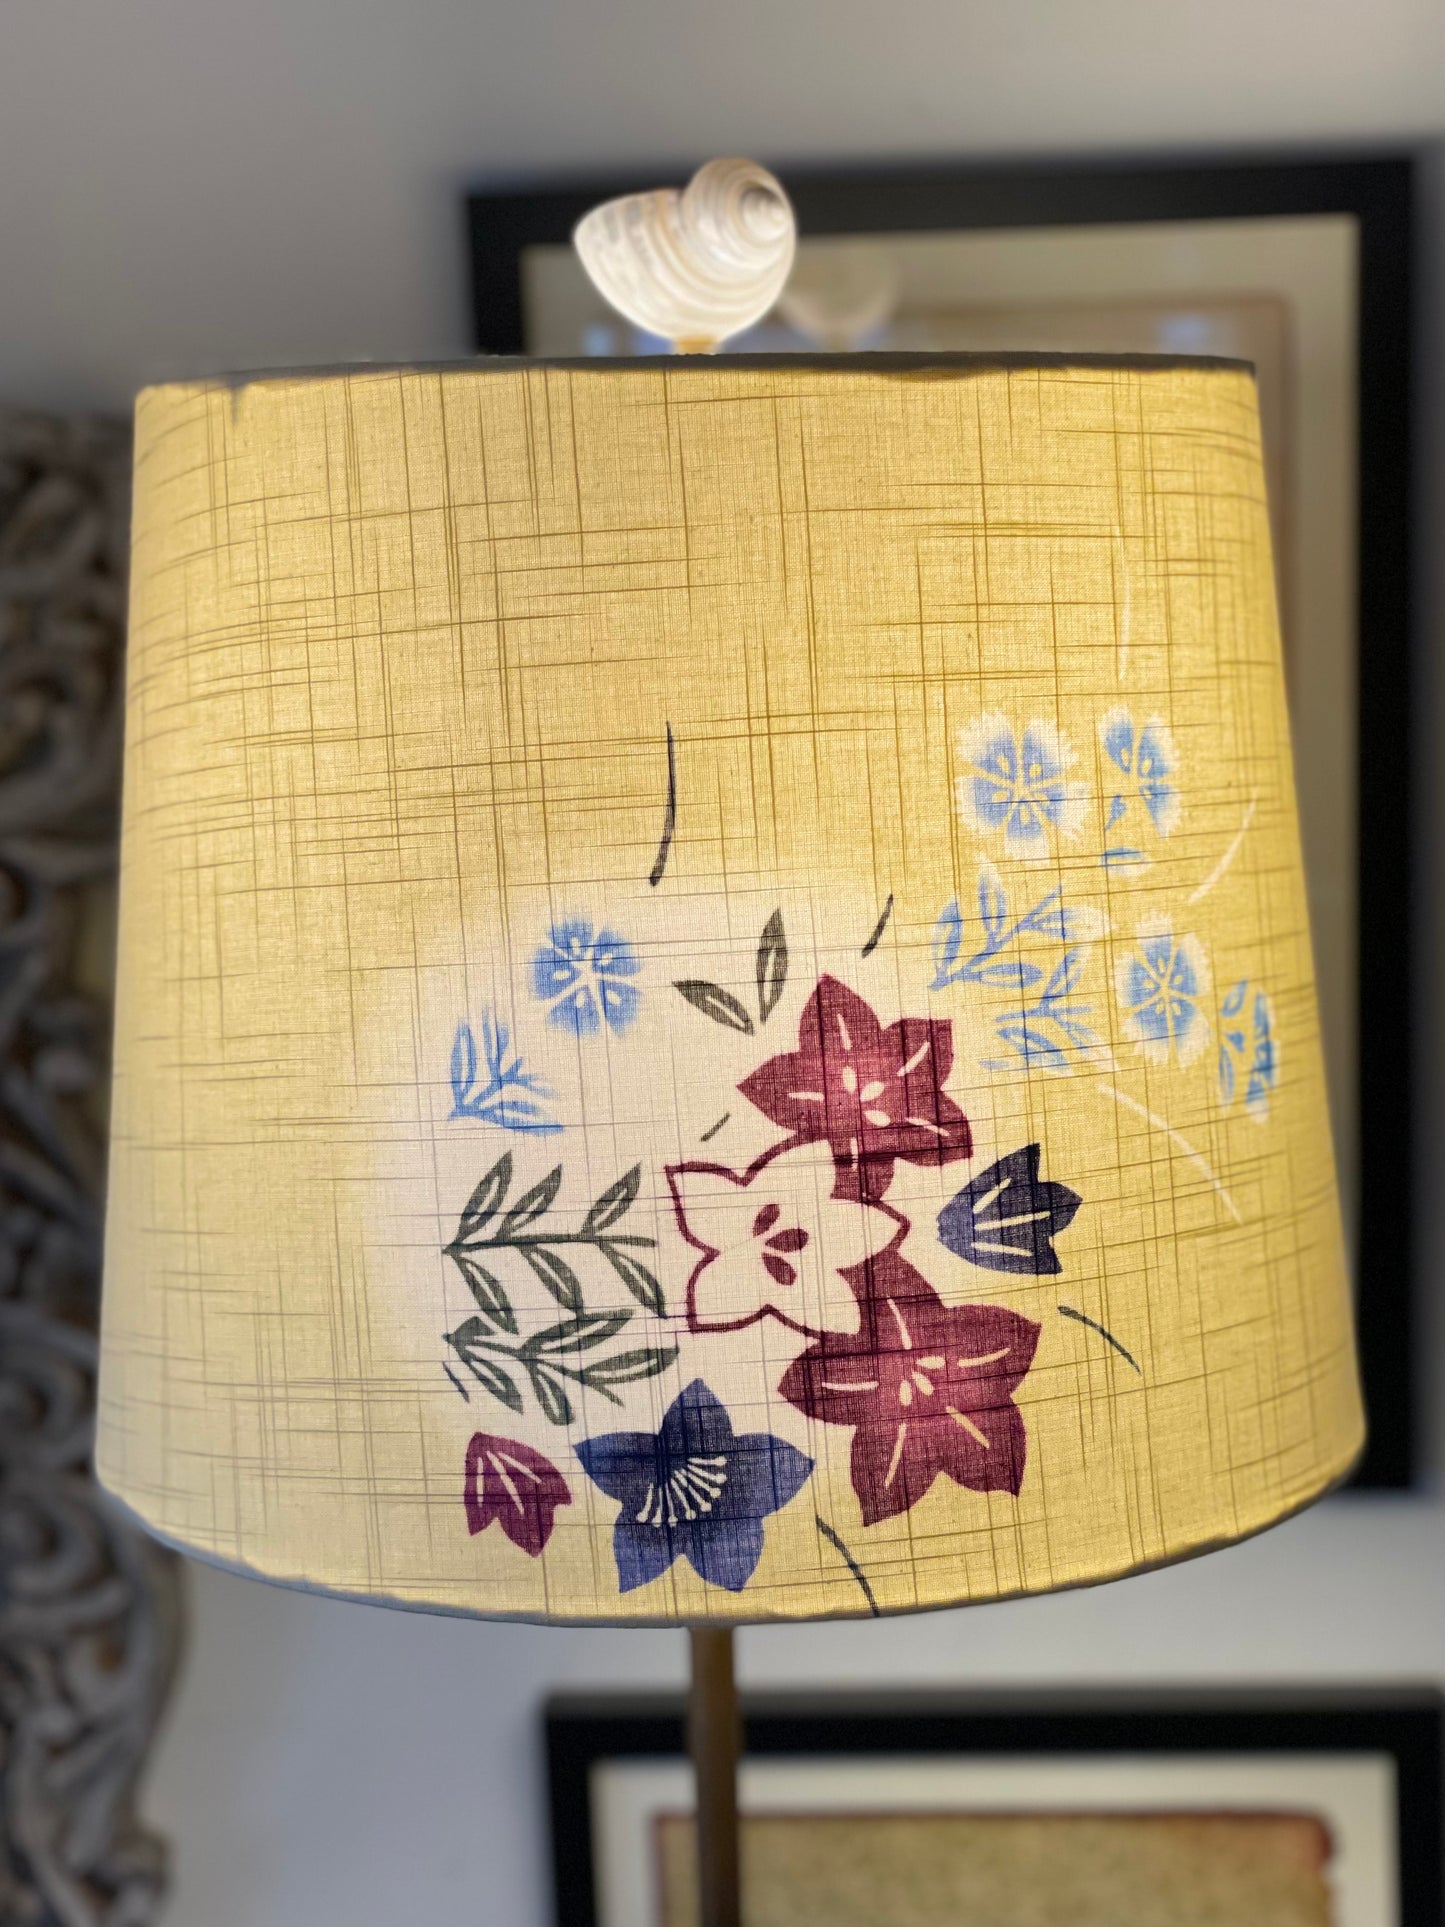 Medium Empire Lampshade. Vintage Summer Kimono "Yukata" Fabric from Japan. Pale Yellow with Pastel Blue, Maroon, and Navy Floral.